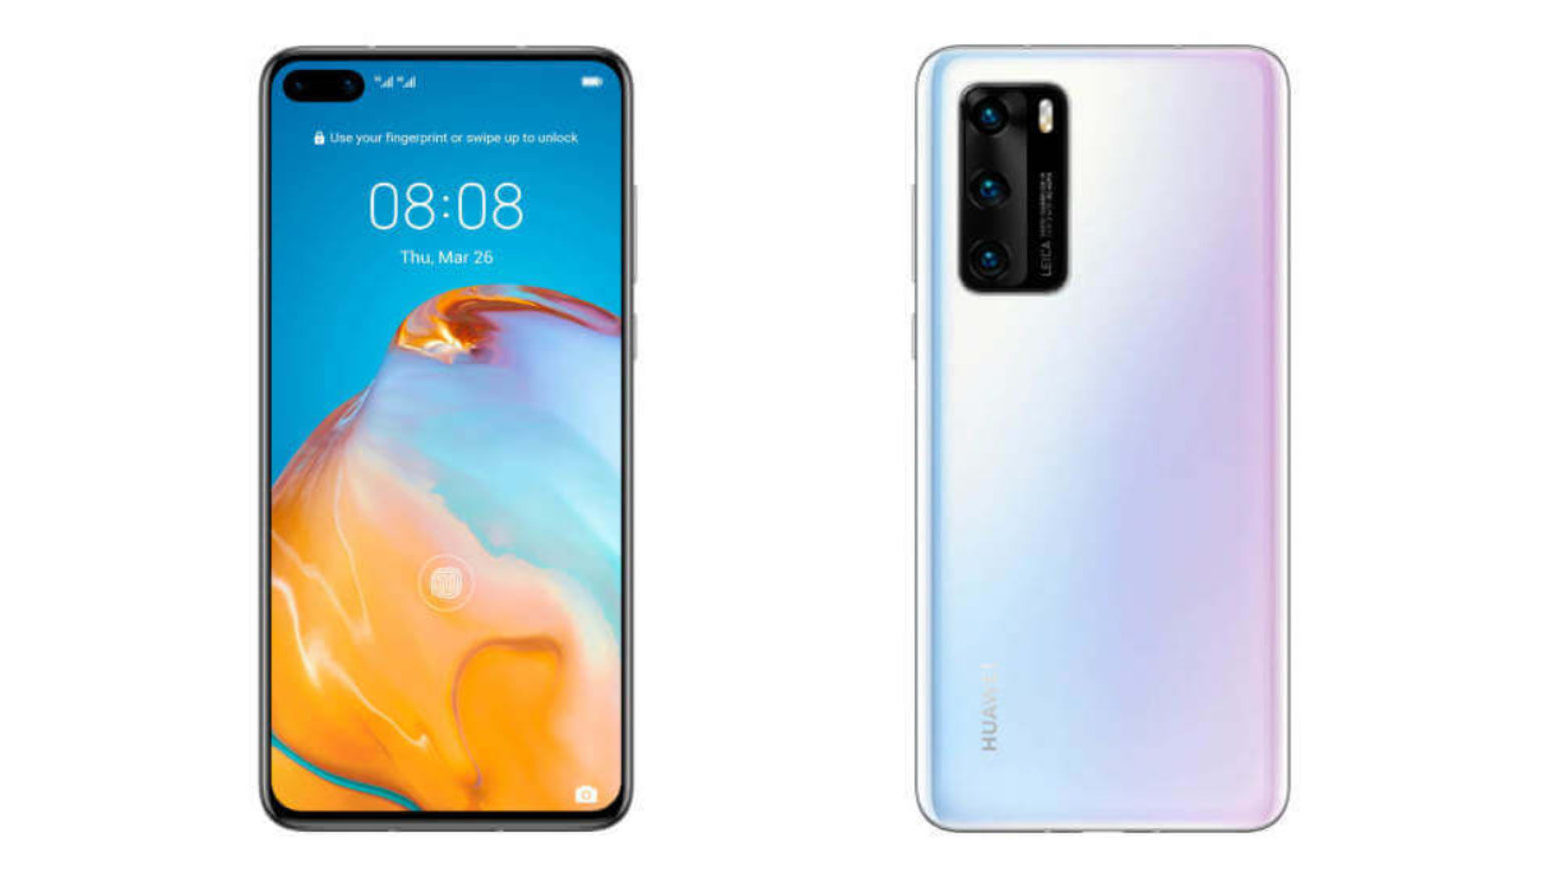 The HUAWEI P40 specs have been leaked by WinFuture.